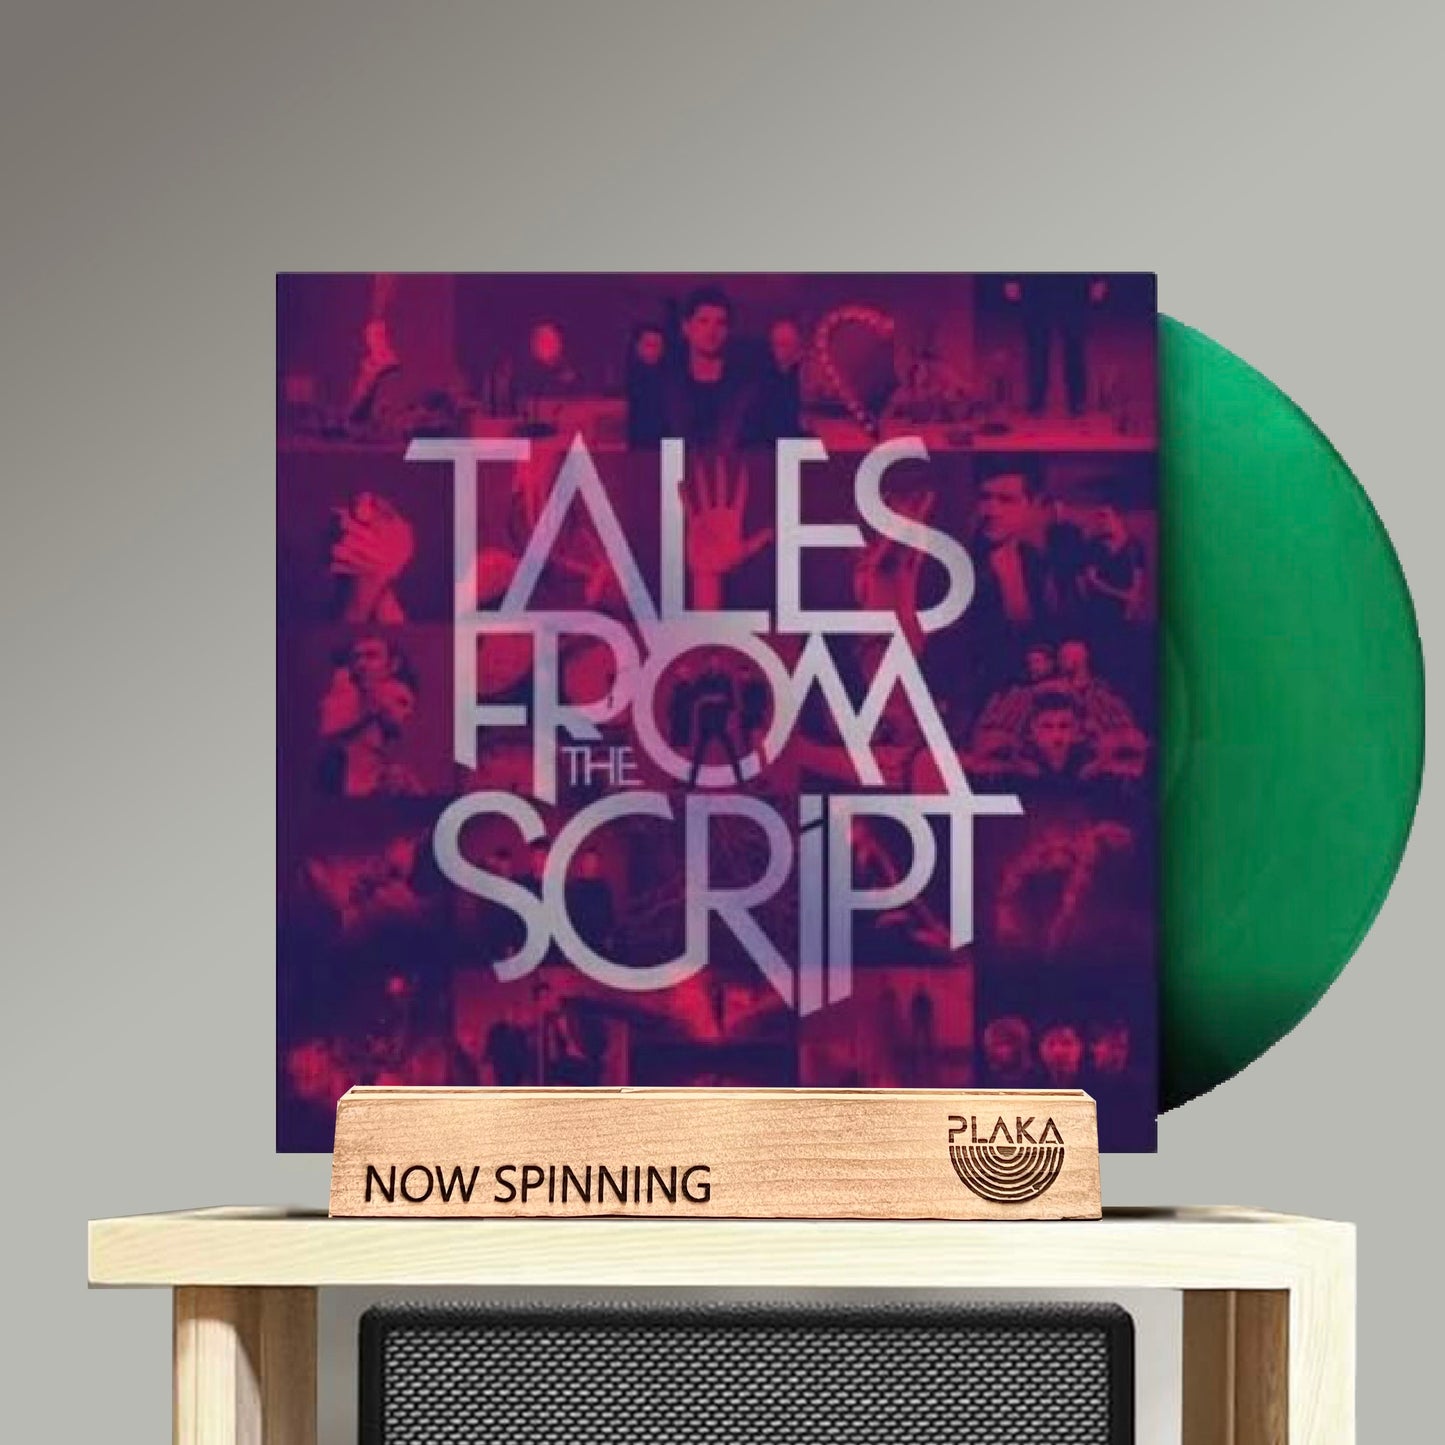 Script, The - Greatest Hits : Tales from the Script